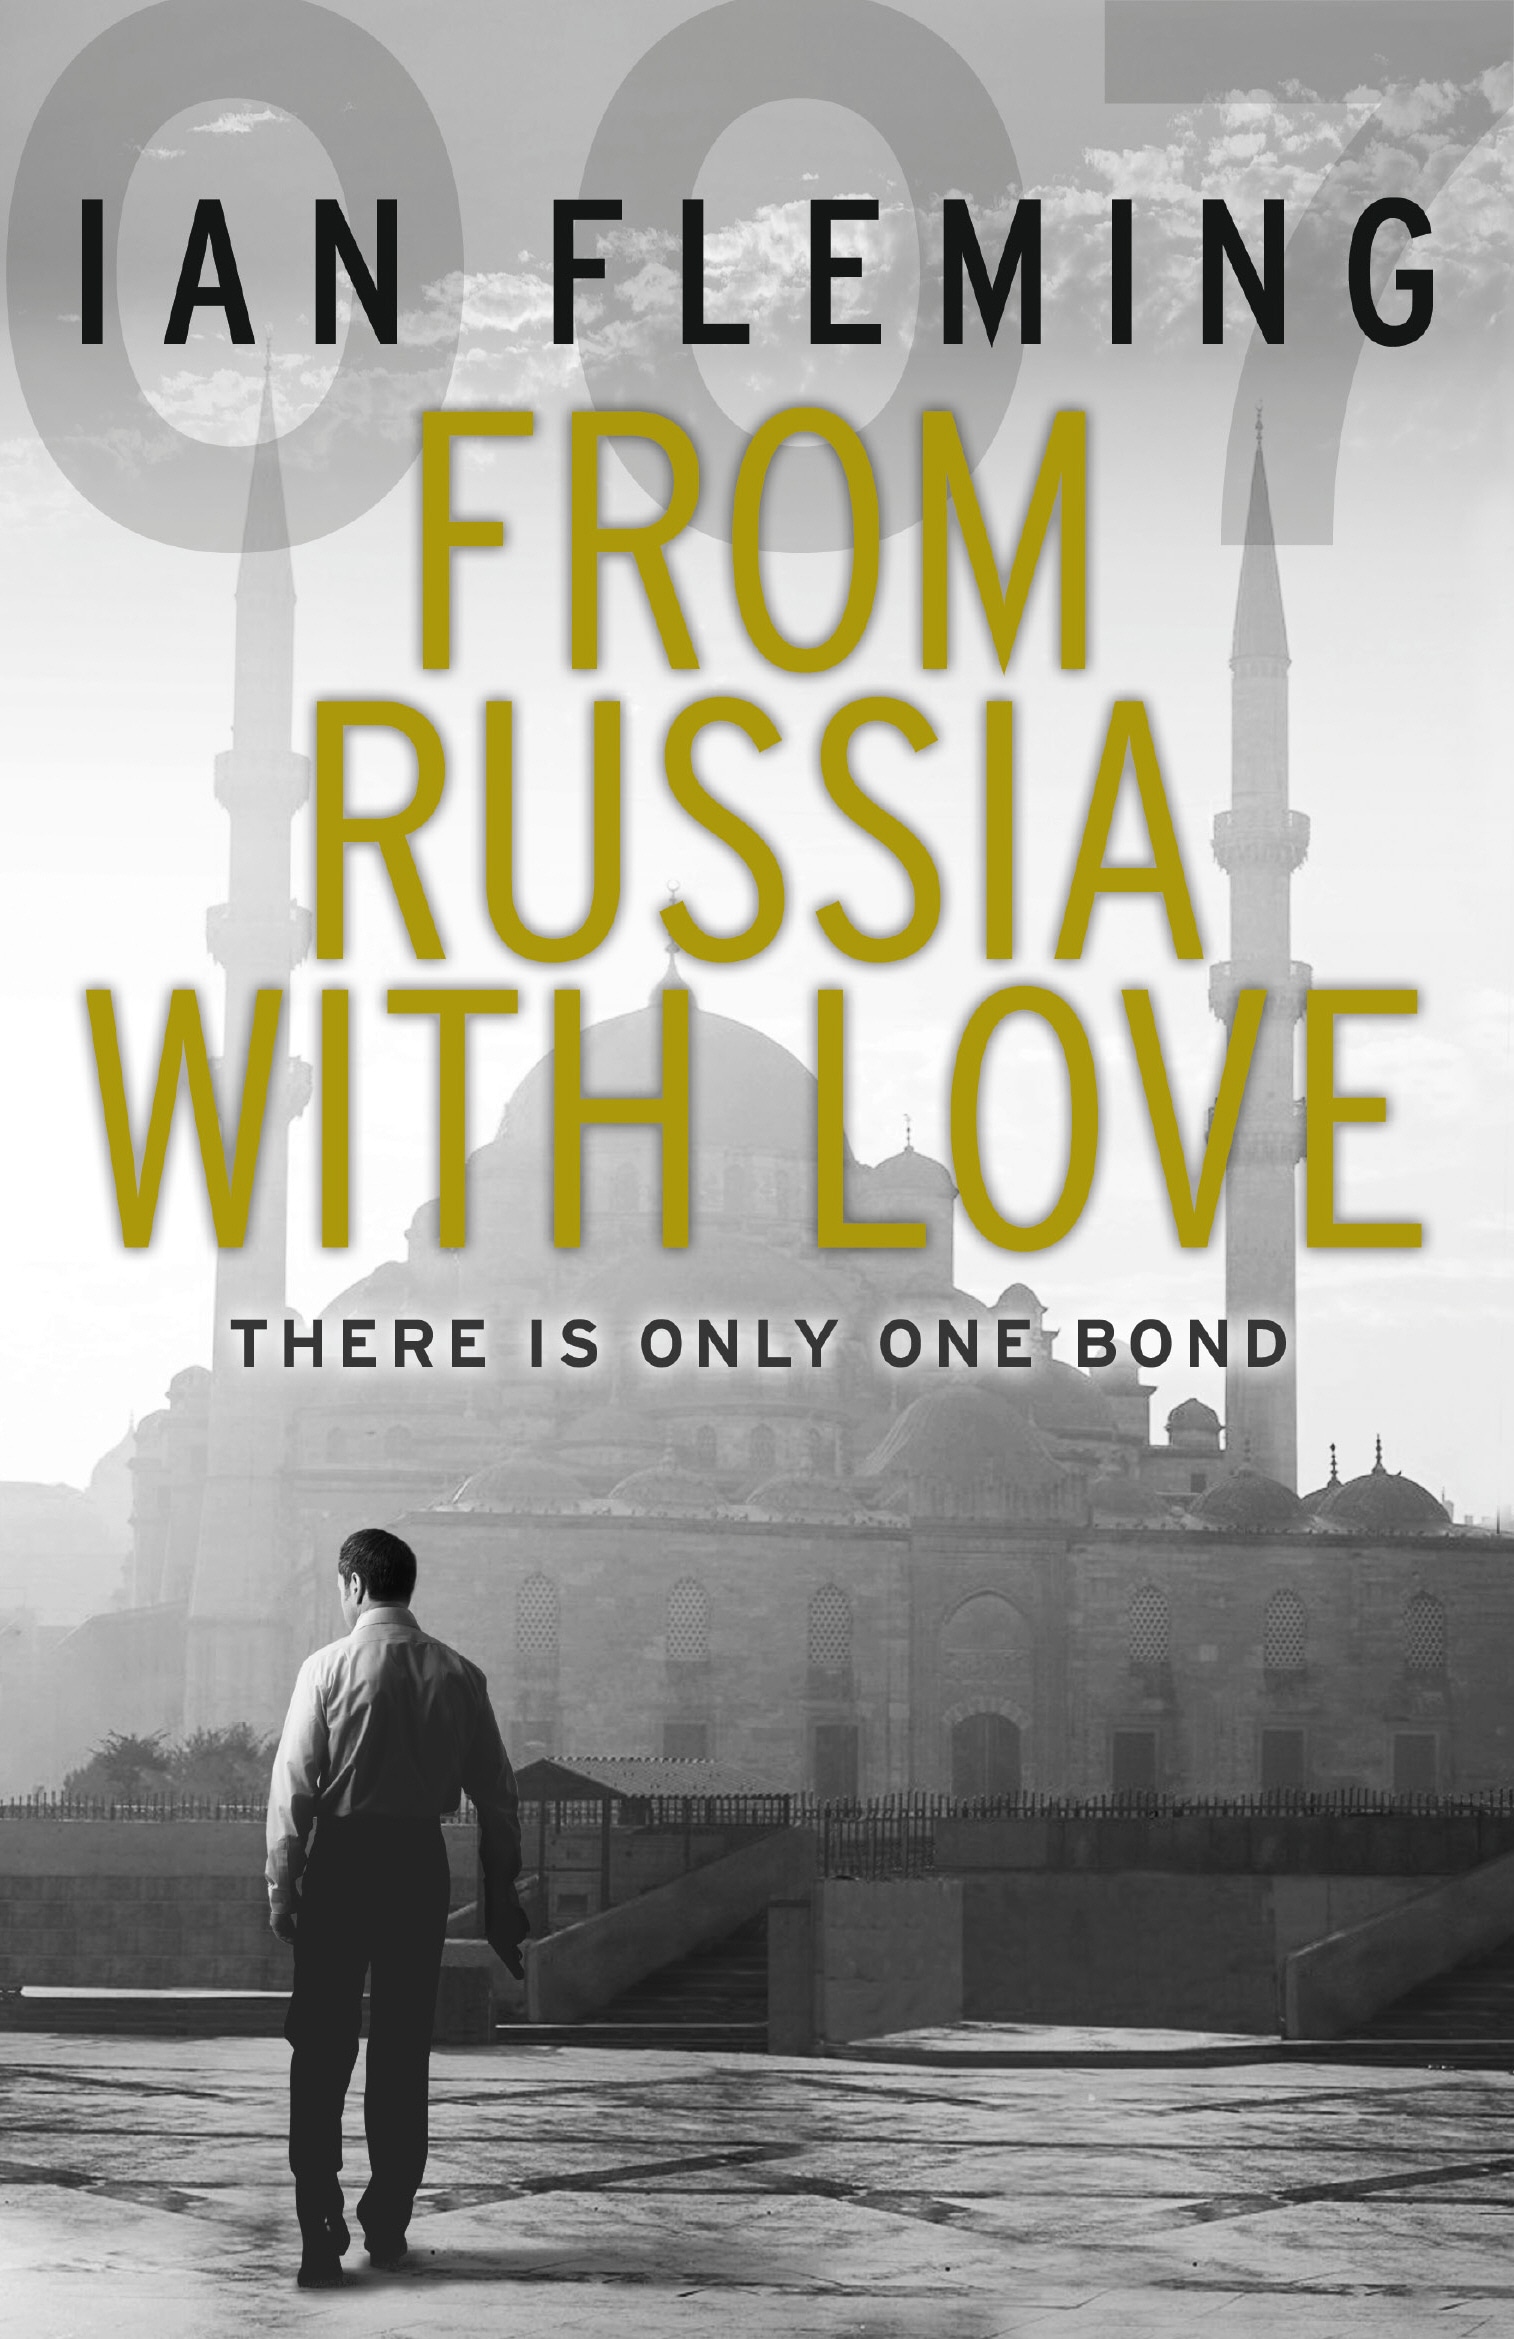 Book “From Russia with Love” by Ian Fleming, Tom Rob Smith — August 2, 2012